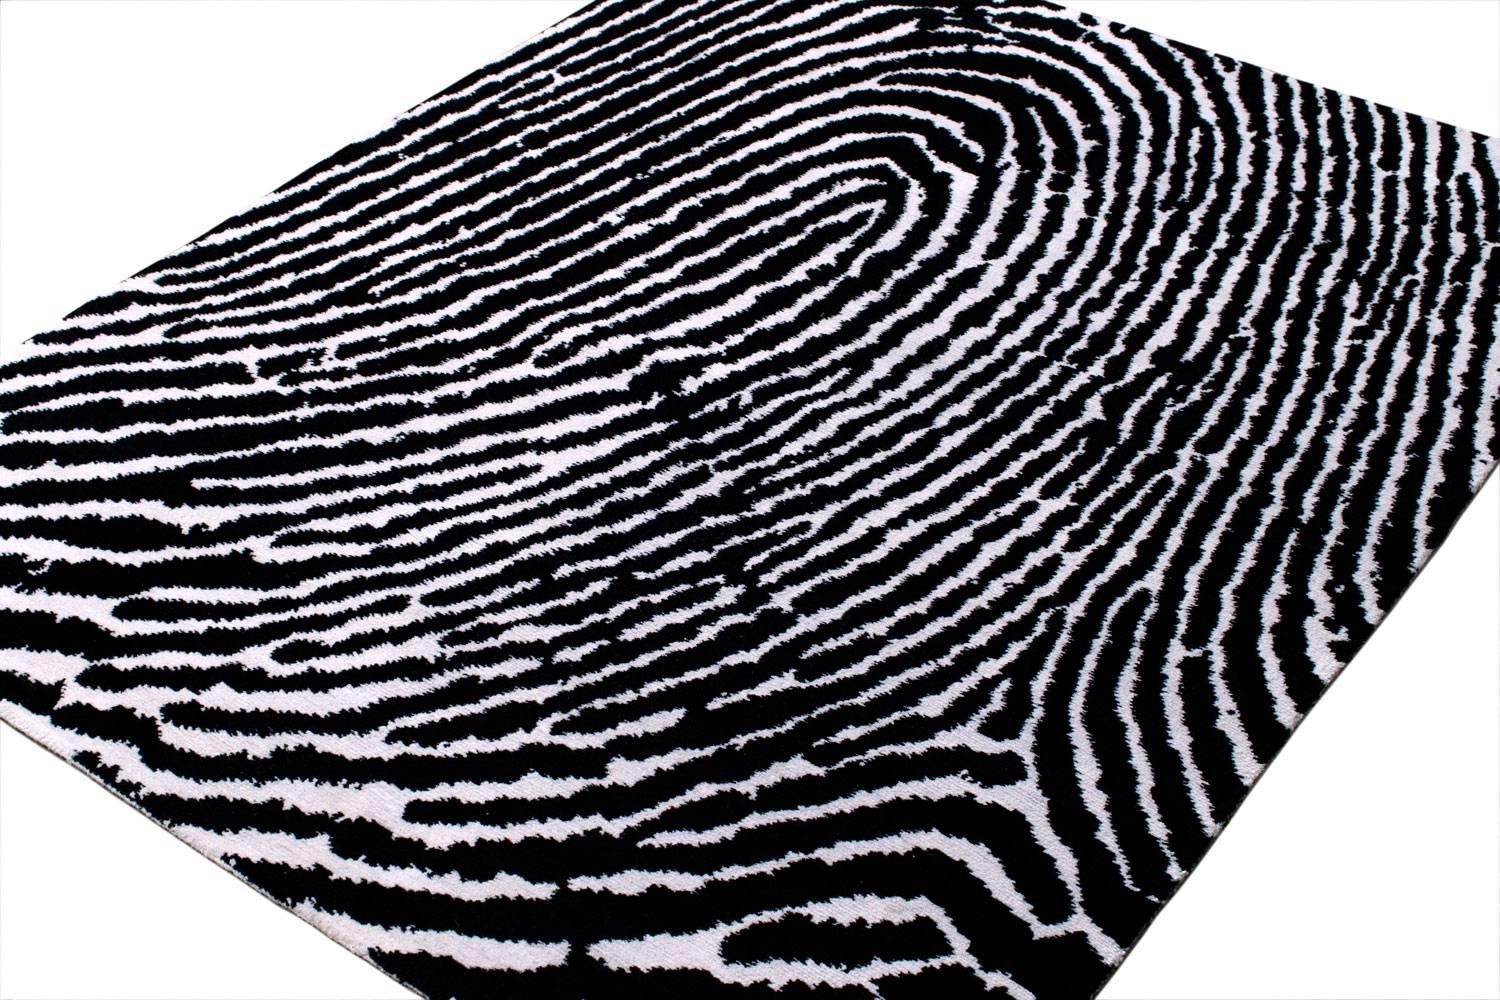 Thumbprint is handwoven with highland wool and high grade silk. Our 'thumbprint' design can be custom-made to match any fingerprint for a complete personal experience! Shown here in a Classic graphic colorway of black and white, this is an original